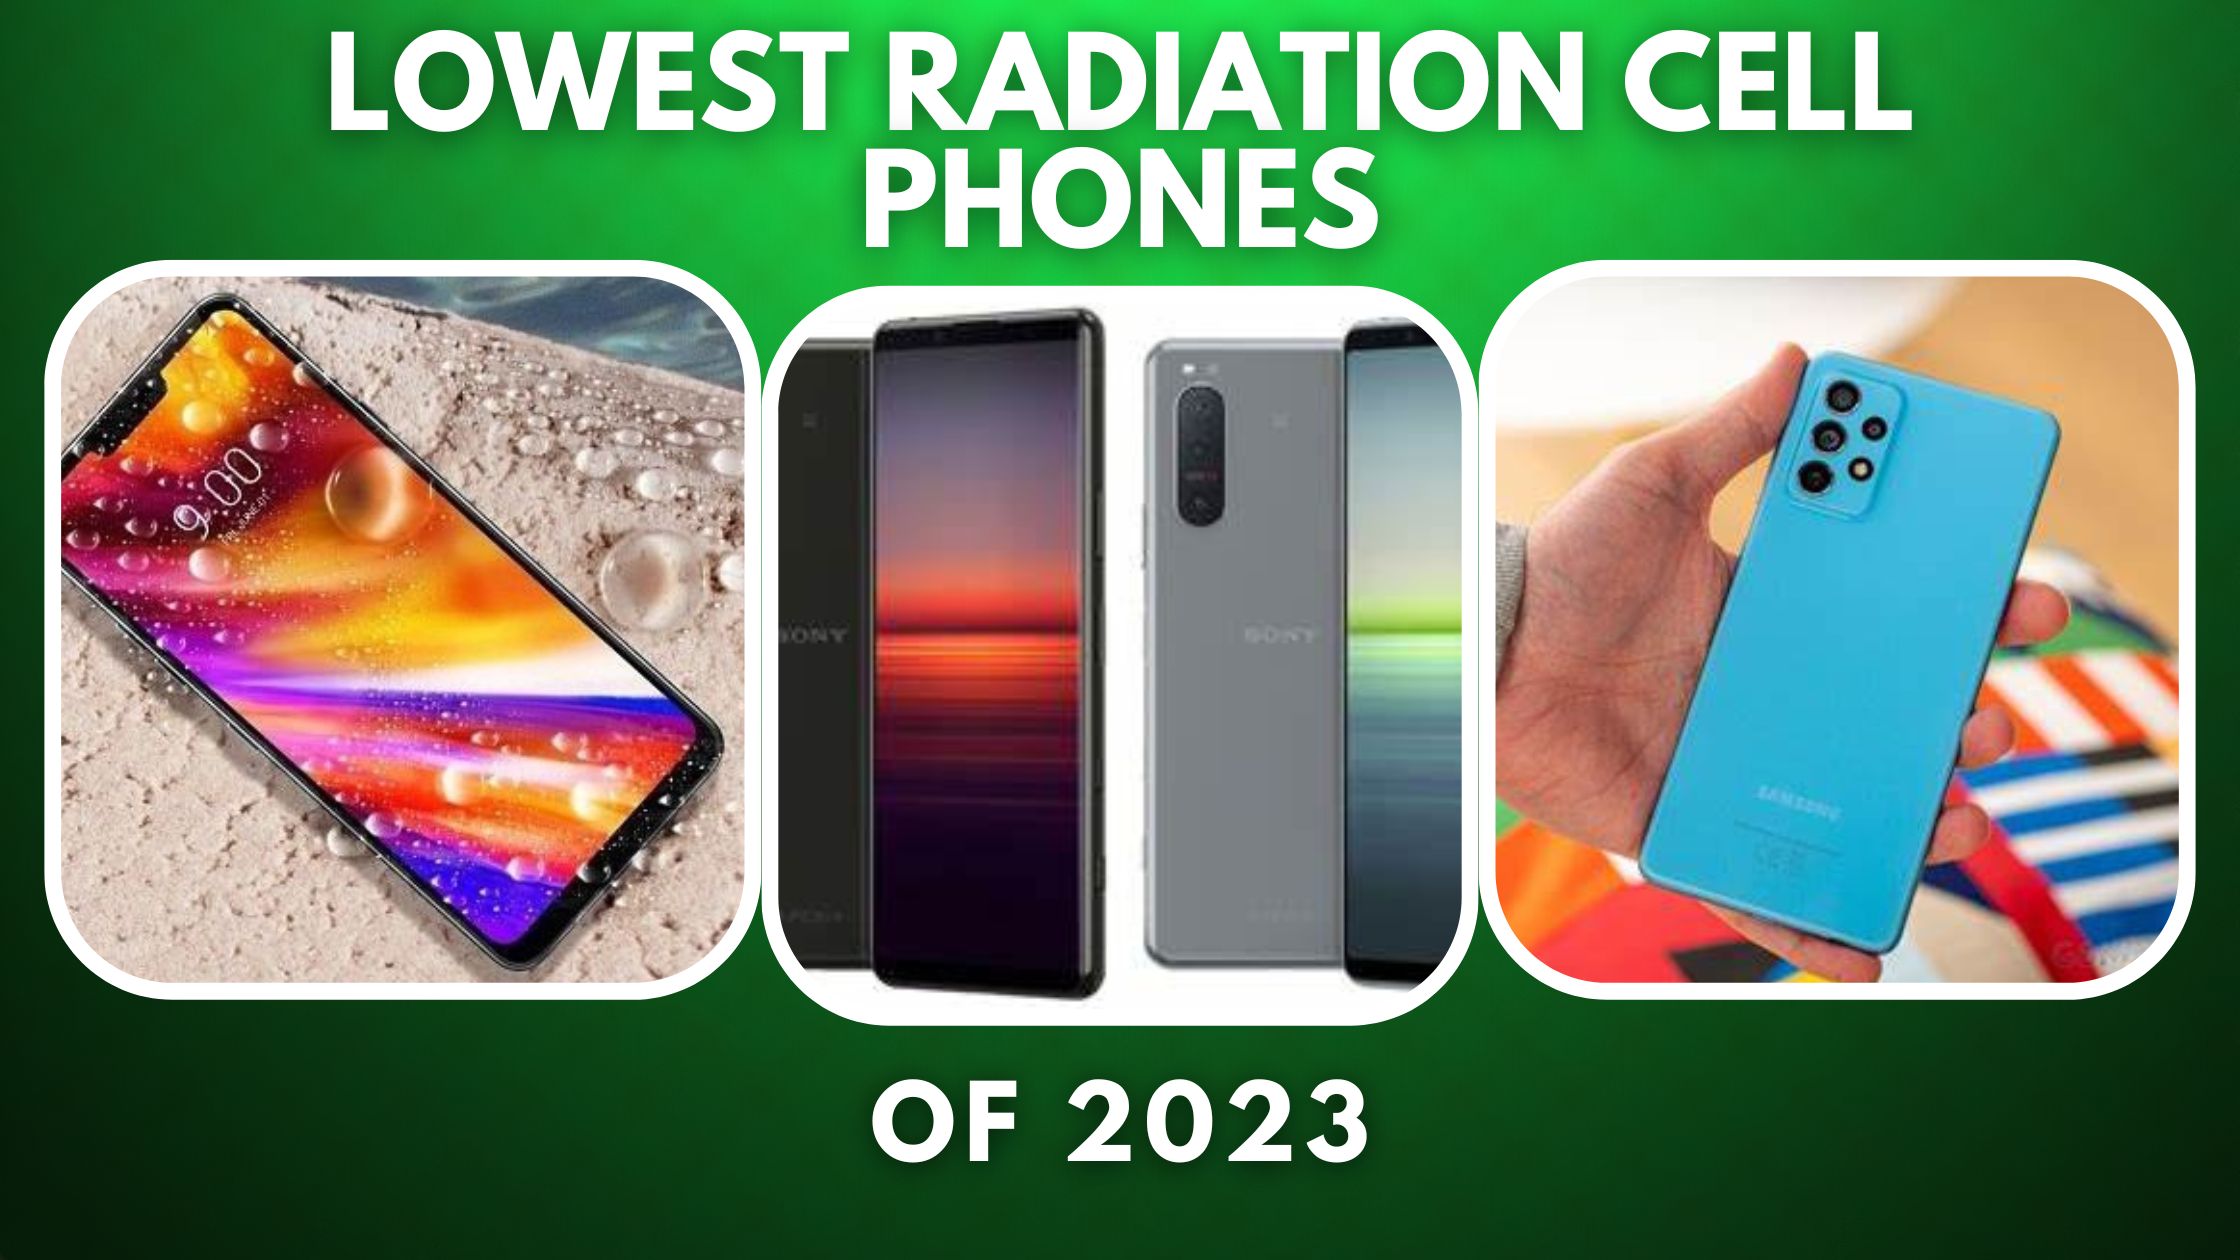 Lowest Radiation Cell Phones of 2023 (Top 10)